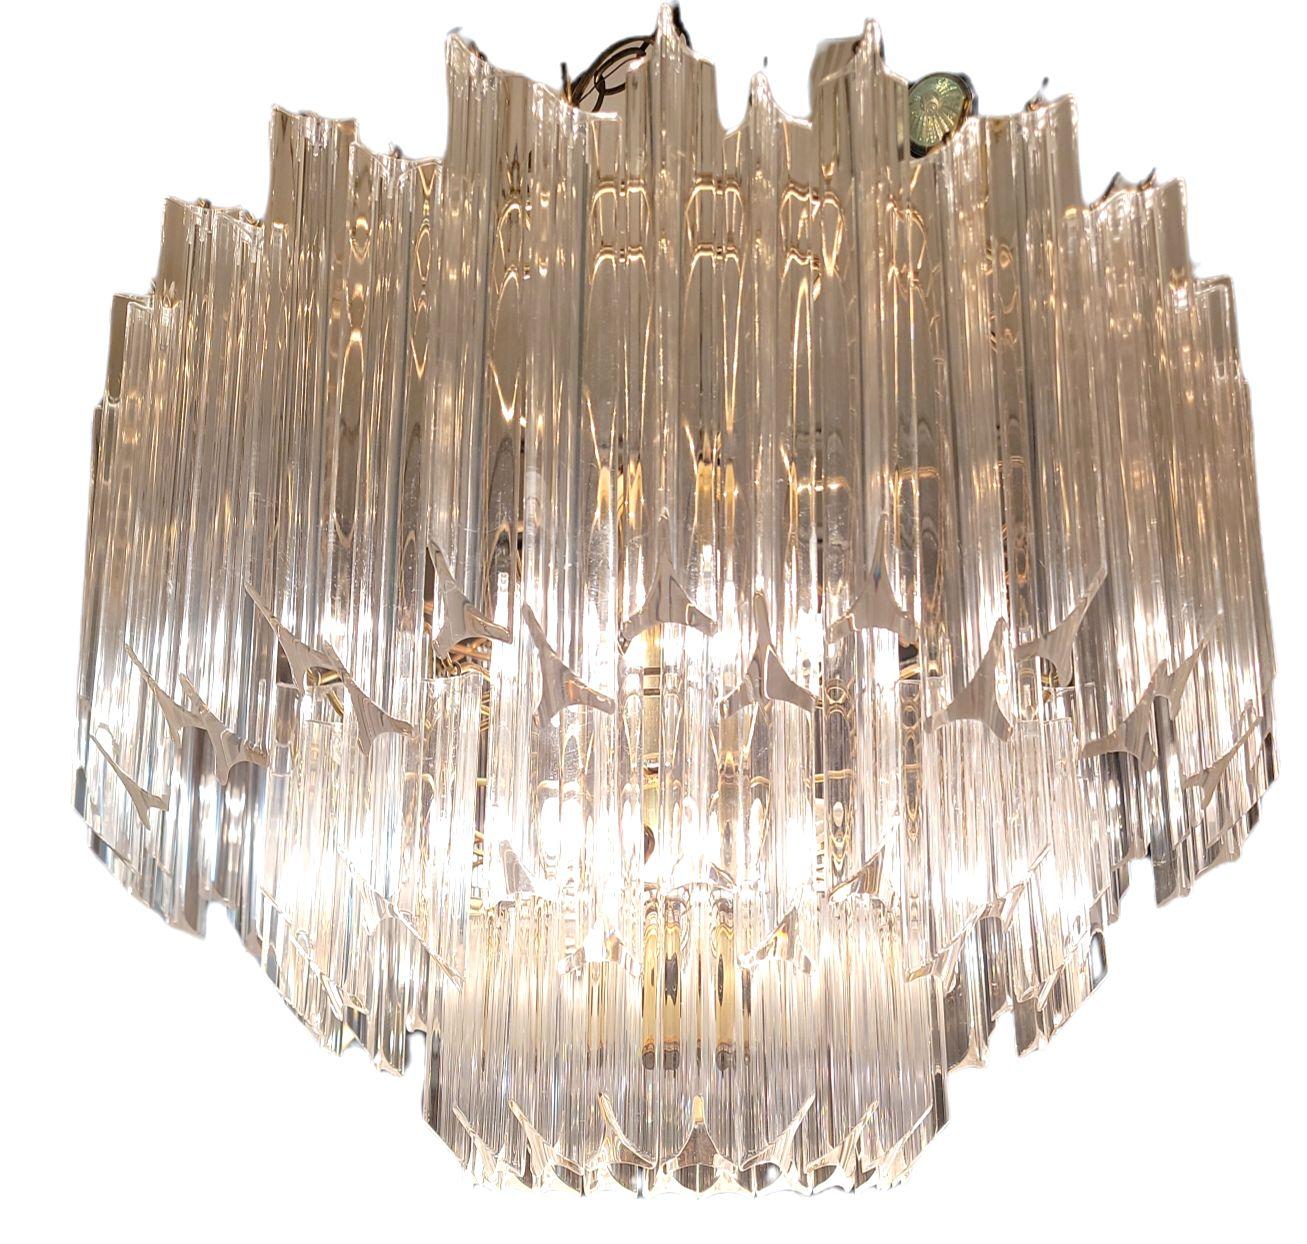 Italian 1960s Midcentury Large Three Tier Lucite Waterfall Chandelier For Sale